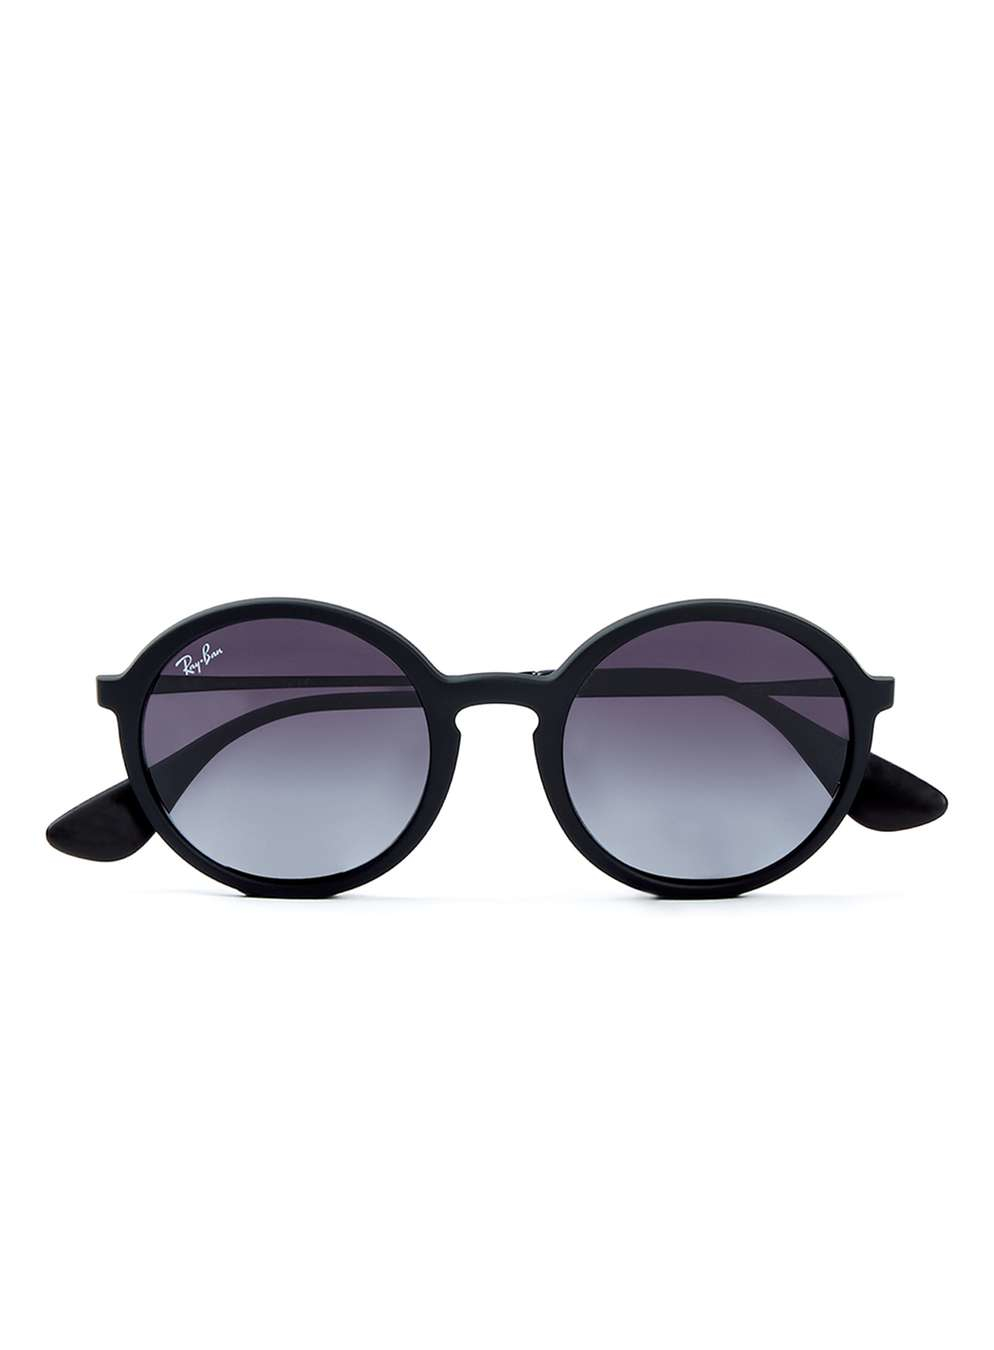 Ray Ban Black Round Sunglasses In Black For Men Lyst 